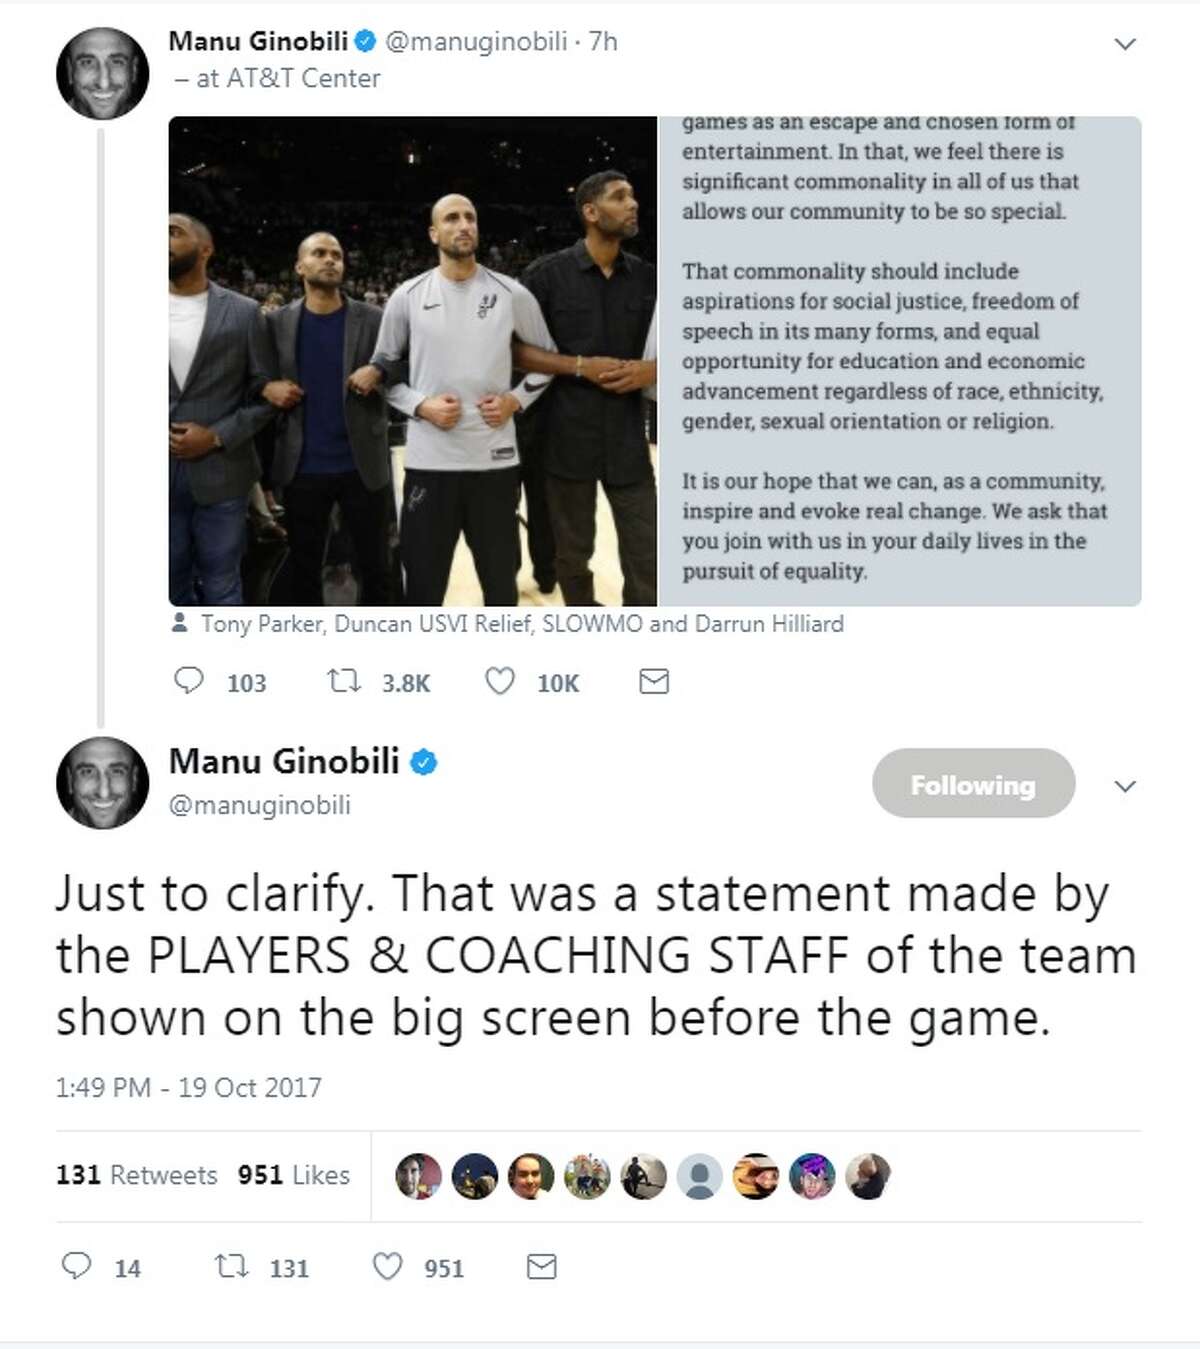 "Just to clarify. That was a statement made by the PLAYERS & COACHING STAFF of the team shown on the big screen before the game," Manu Ginobili tweeted.